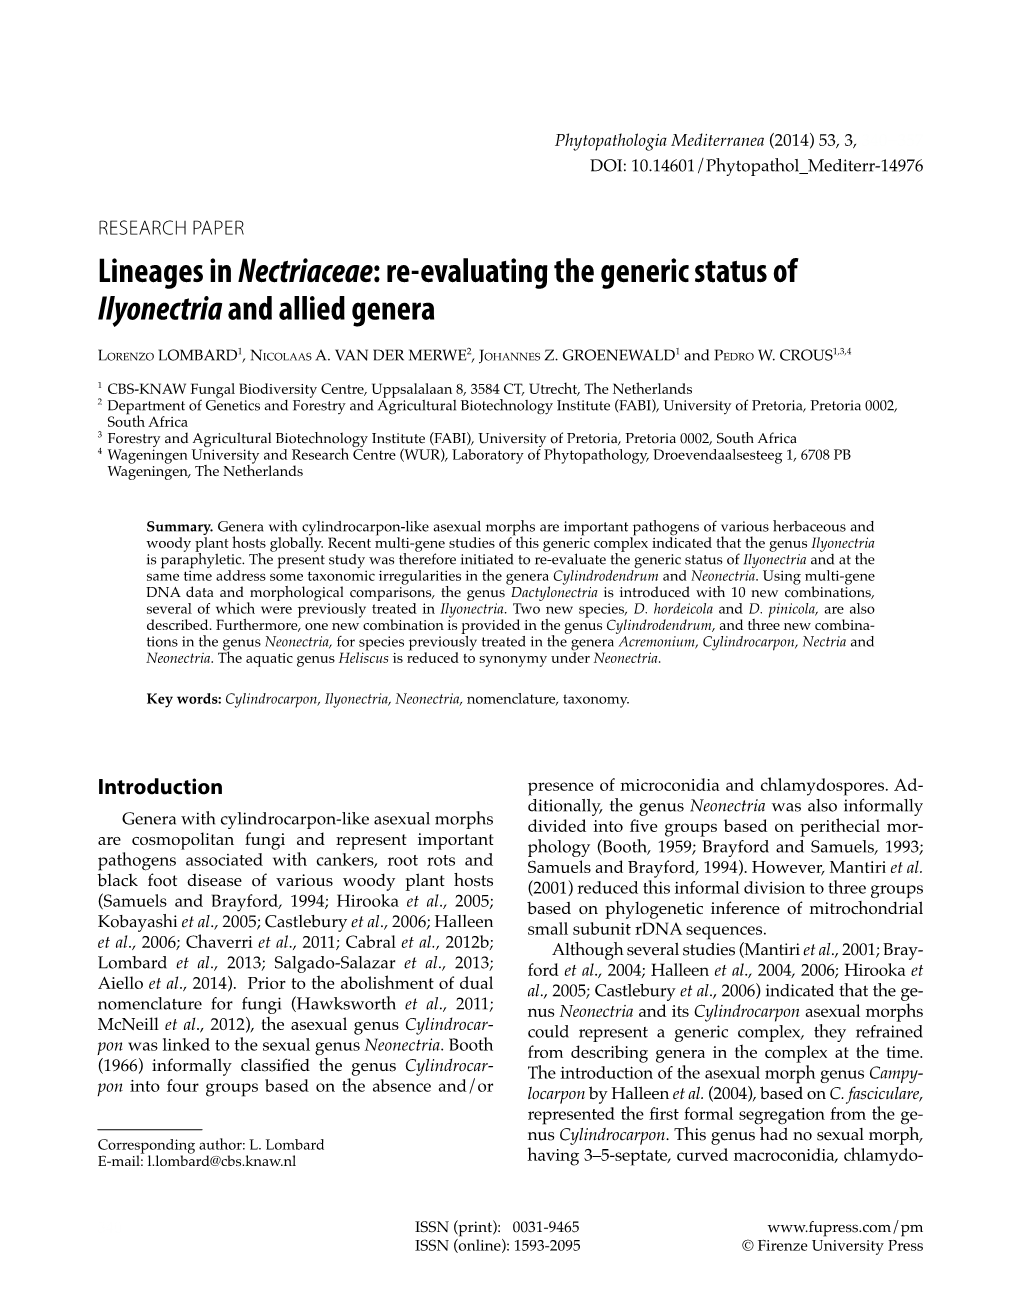 Lineages in Nectriaceae: Re-Evaluating the Generic Status of Ilyonectria and Allied Genera